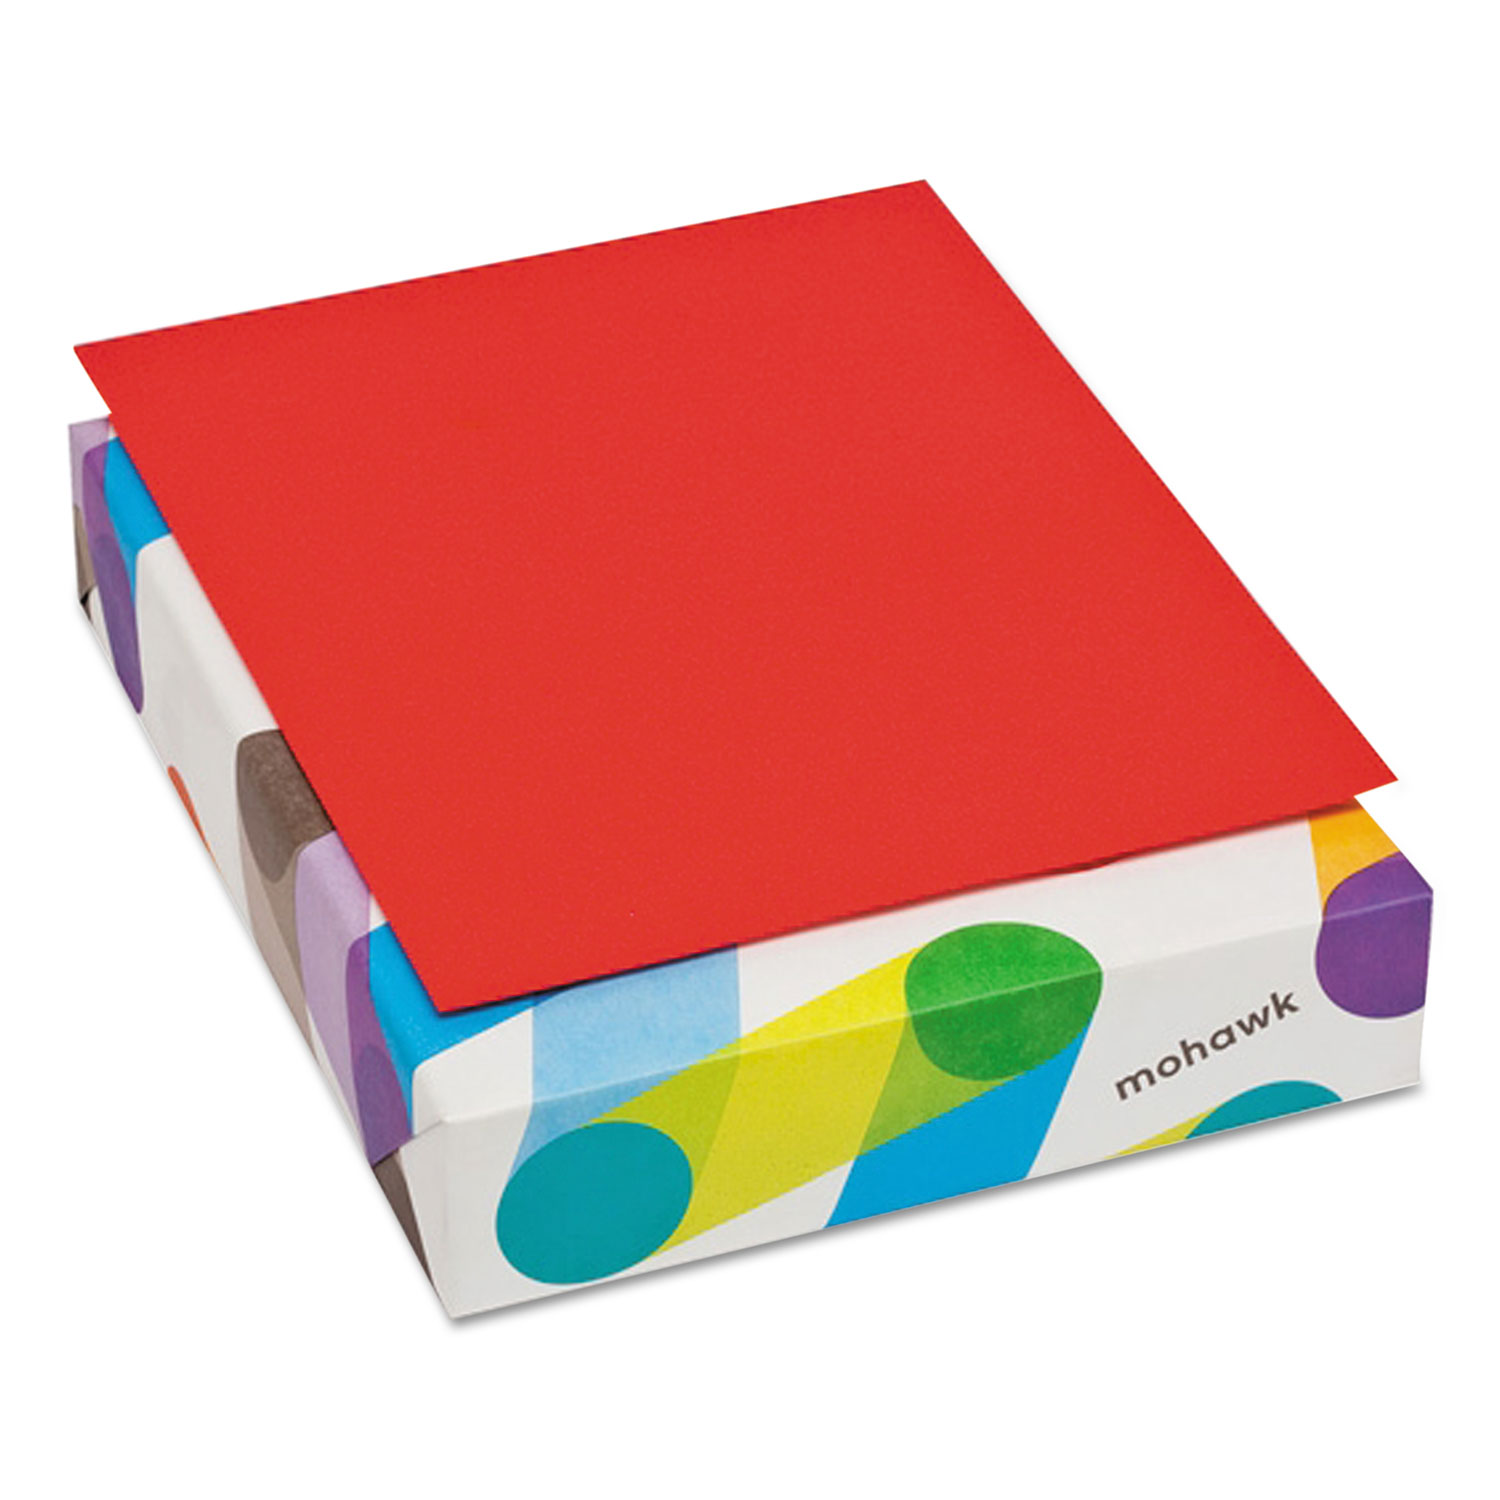 BriteHue Multipurpose Colored Paper, 24lb, 8 1/2 x 11, Red, 500 Sheets